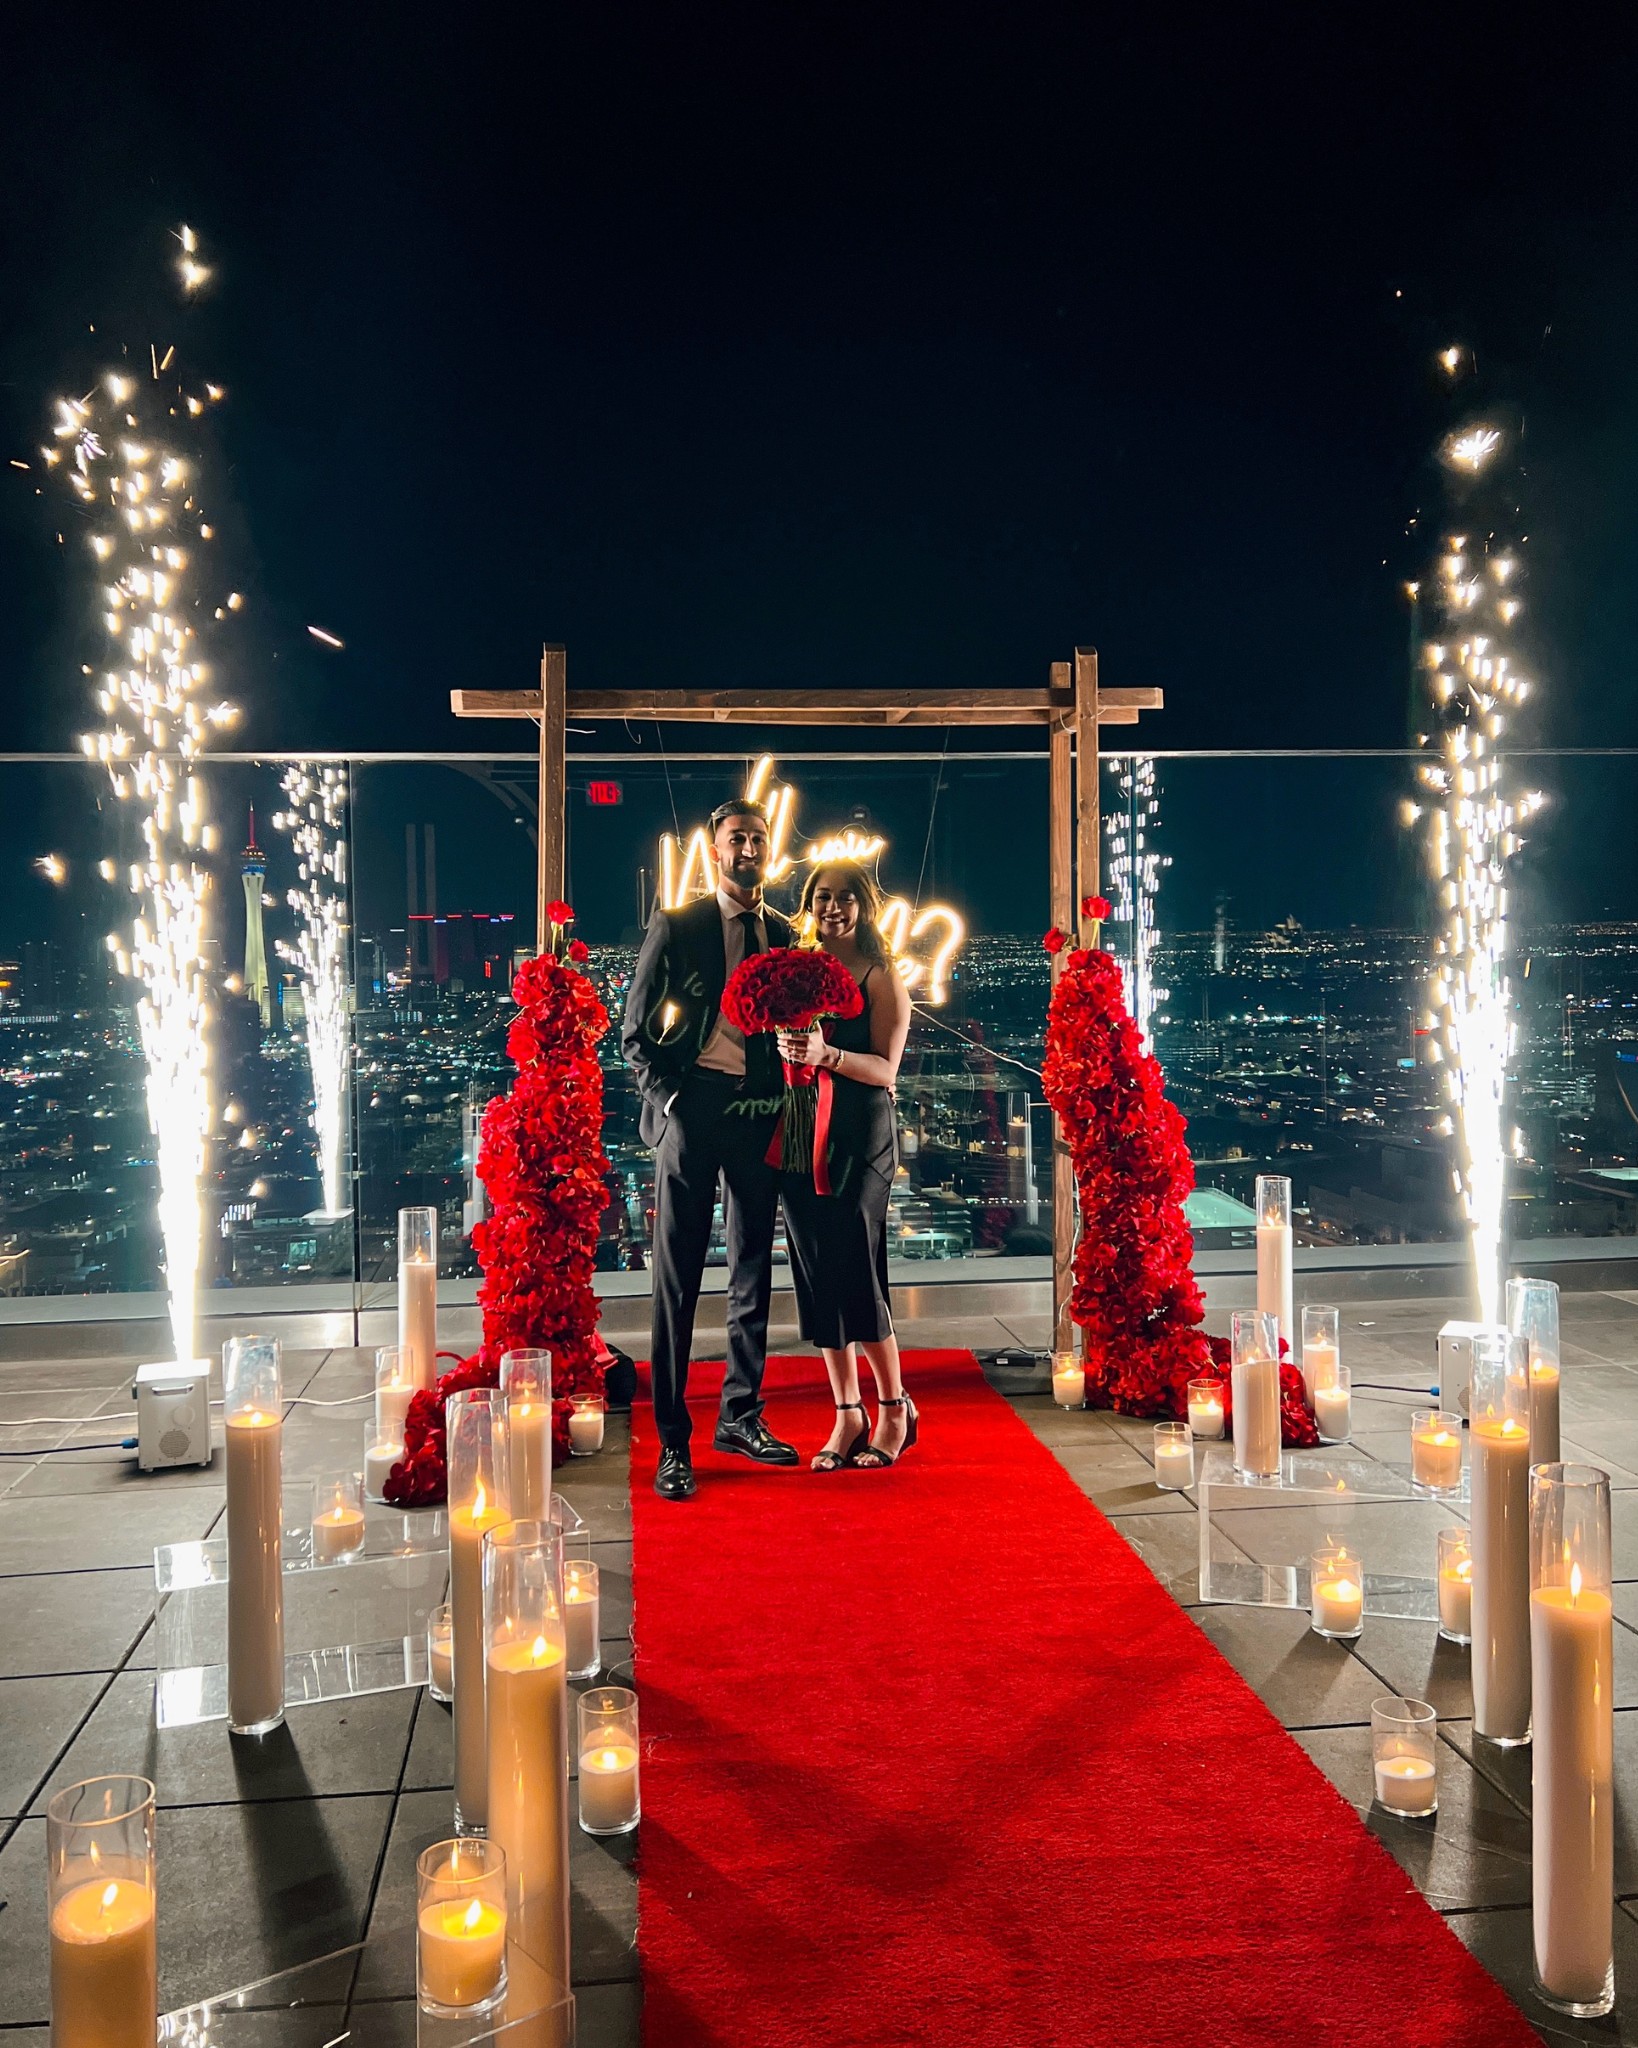 outdoor wedding proposal las vegas strip view rooftop balcony with sparkler fountain and neon will you marry me sign and red carpet candles and flowers